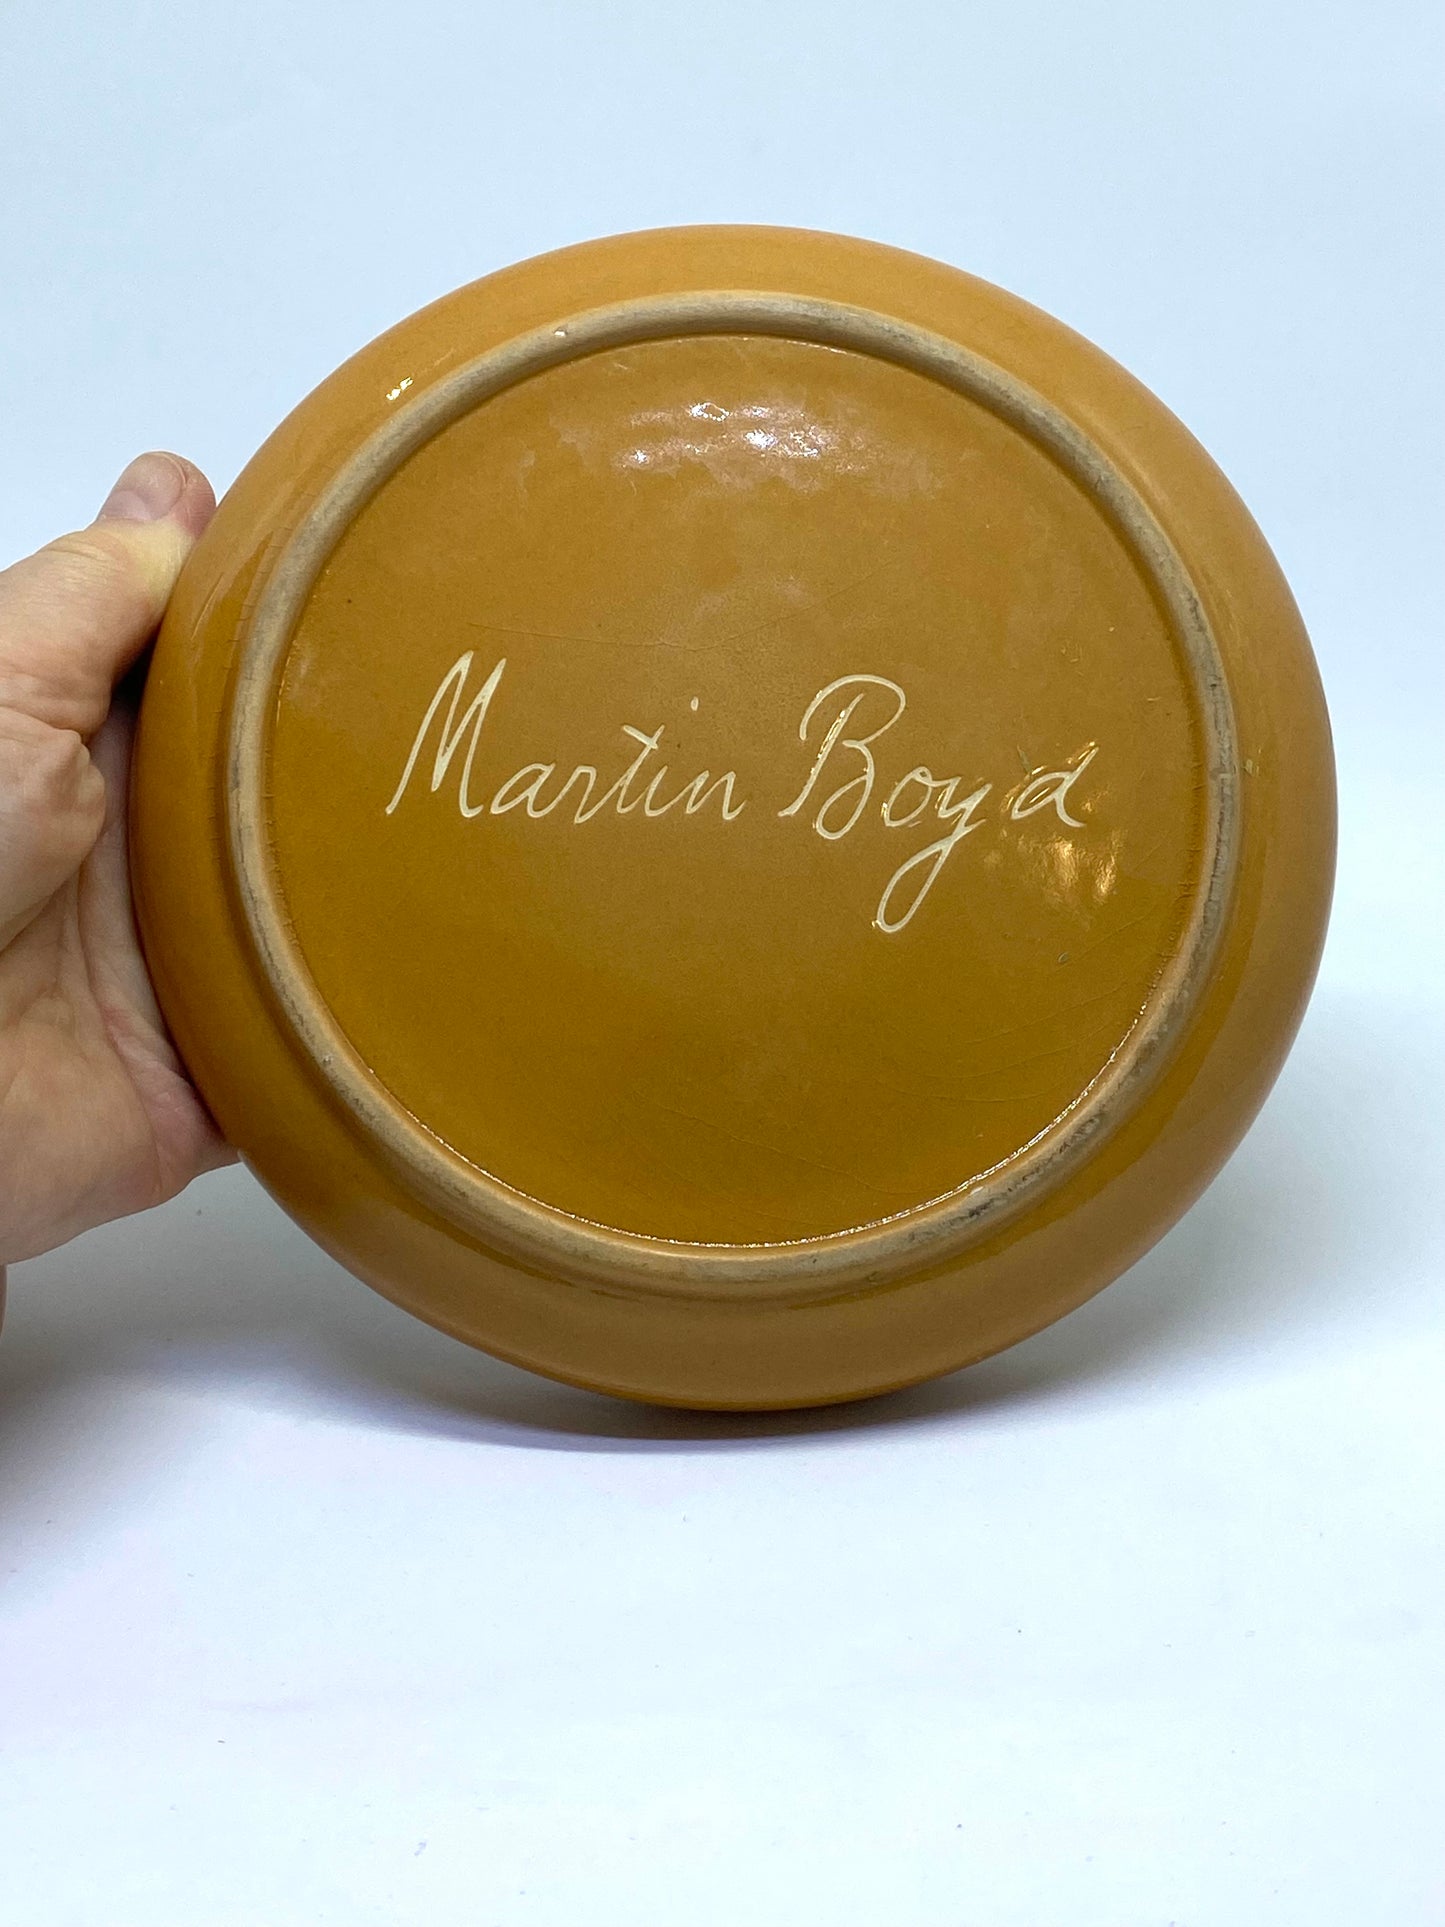 Vintage 1940s/1950s Martin and Guy Boyd Bowls